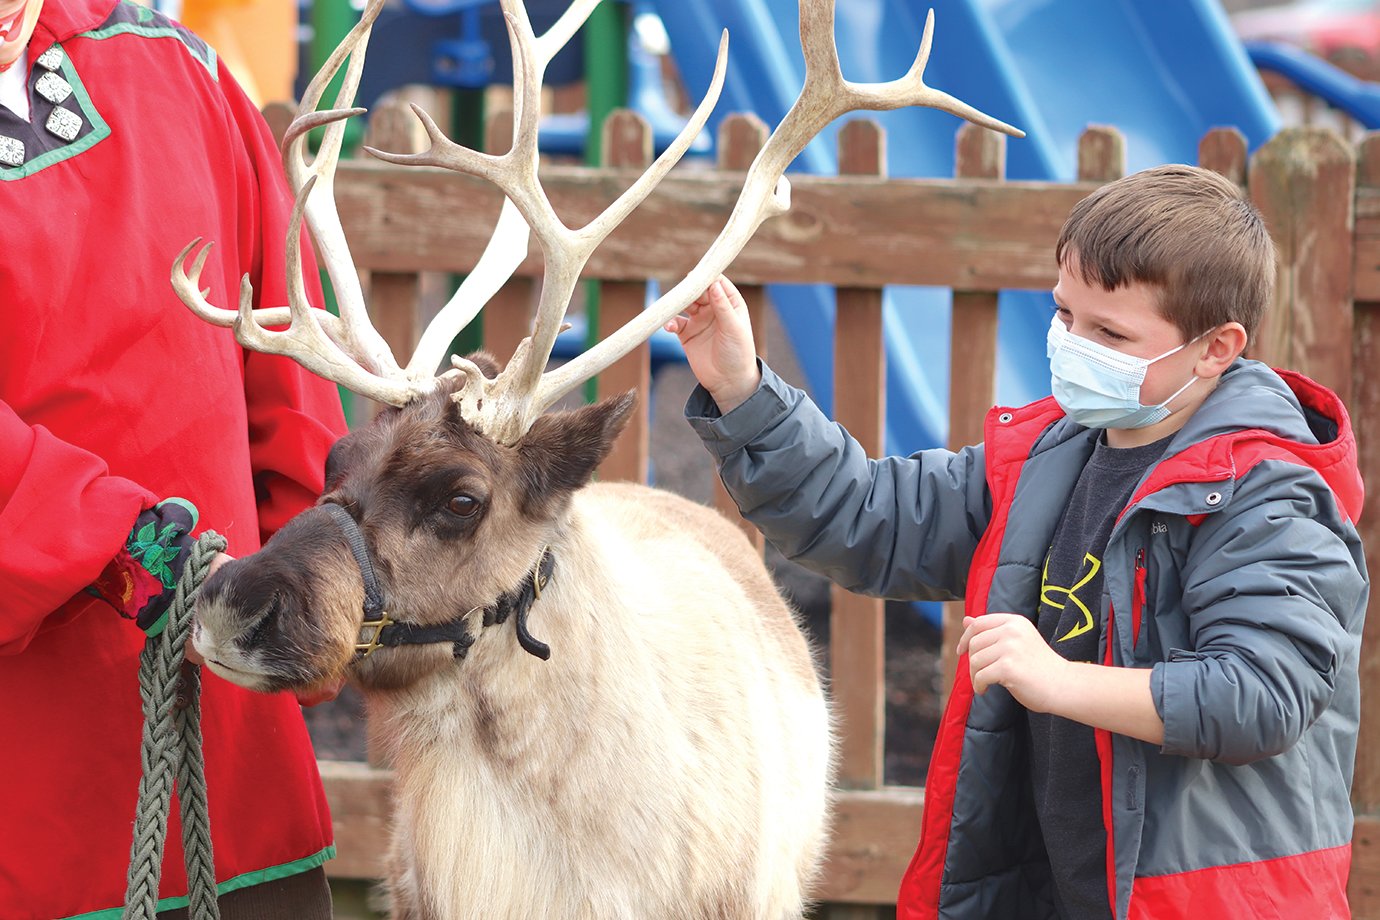 Brayden Leslie, second-grade student at Sommer, feels reindeer Clarice's antlers Friday during a Silly Safari event at the school. Nine-year-old Clarice has been visiting children her whole life, trainer Chris Hanson said, and even seemed to enjoy the interaction.